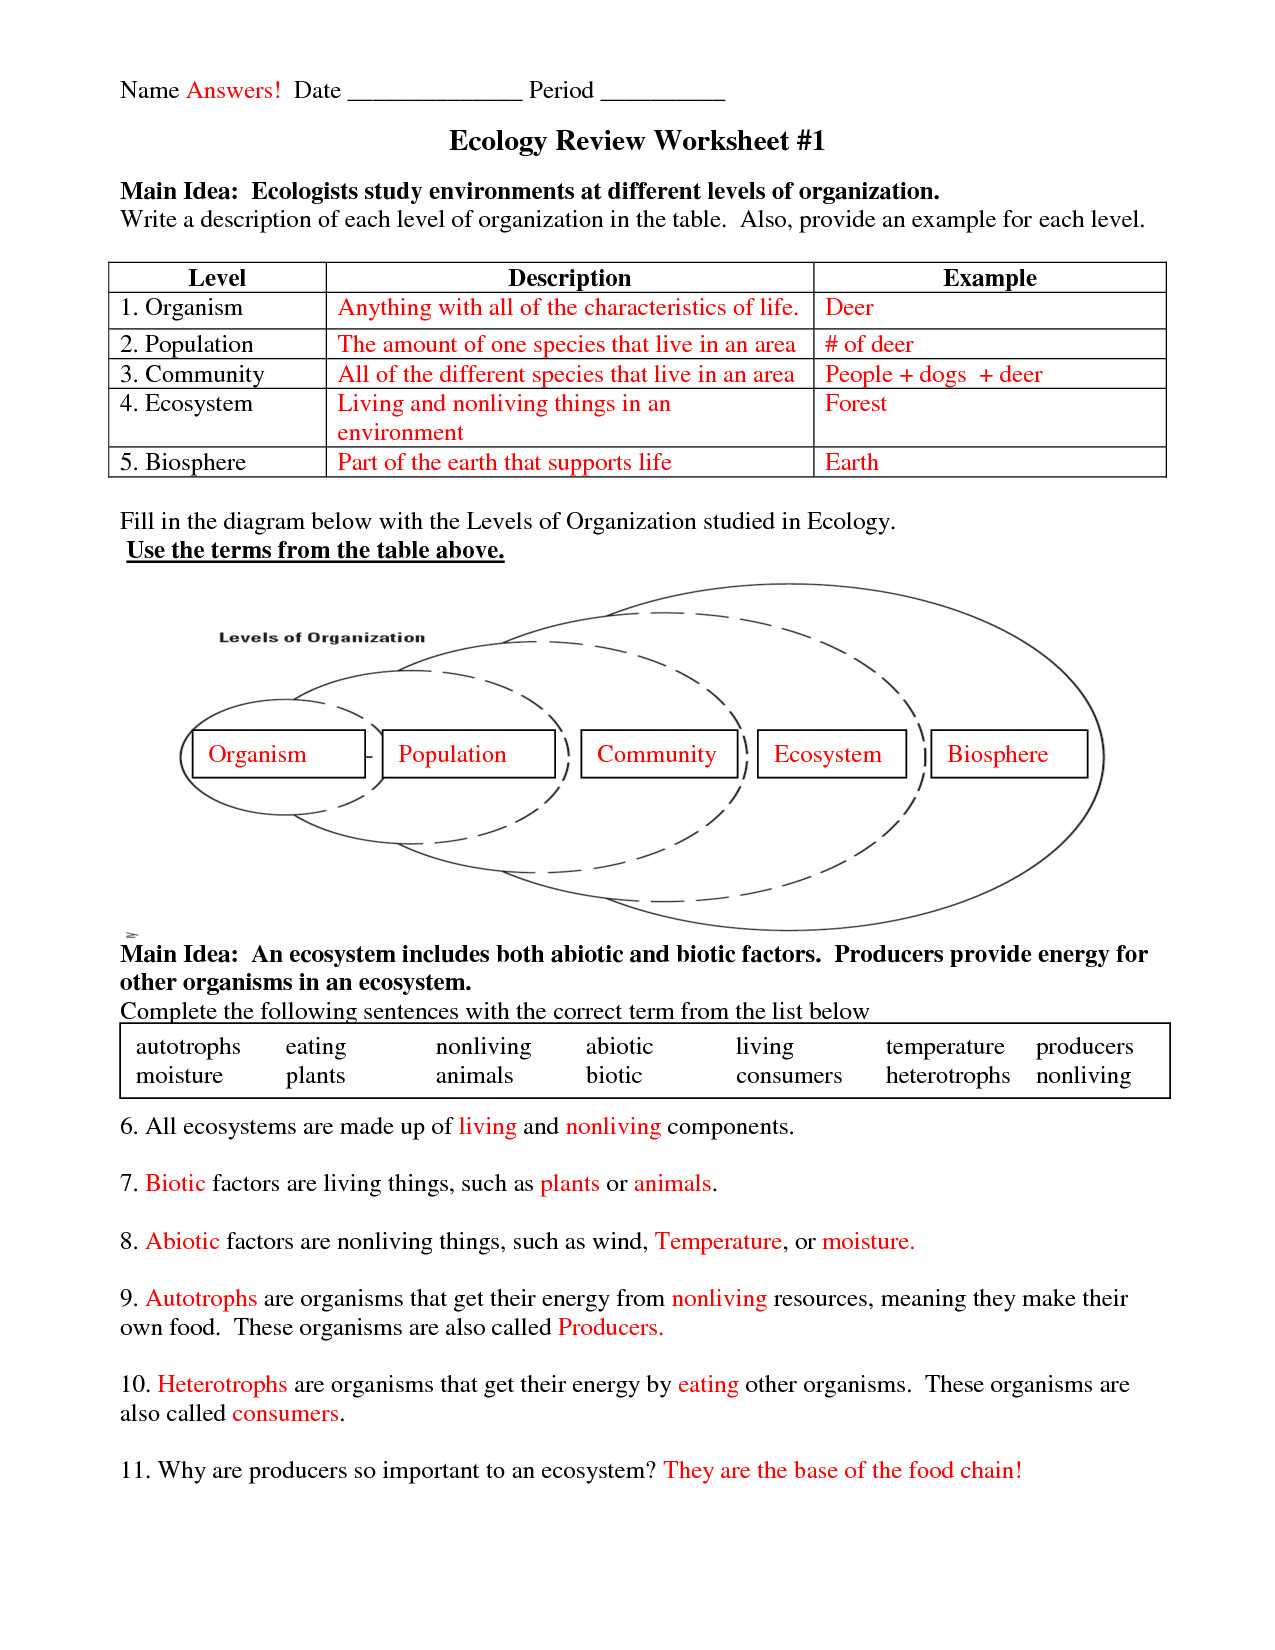 The History Of Life On Earth Worksheet Answers and Species Interactions Worksheet Answers Awesome 24 Best Ecology